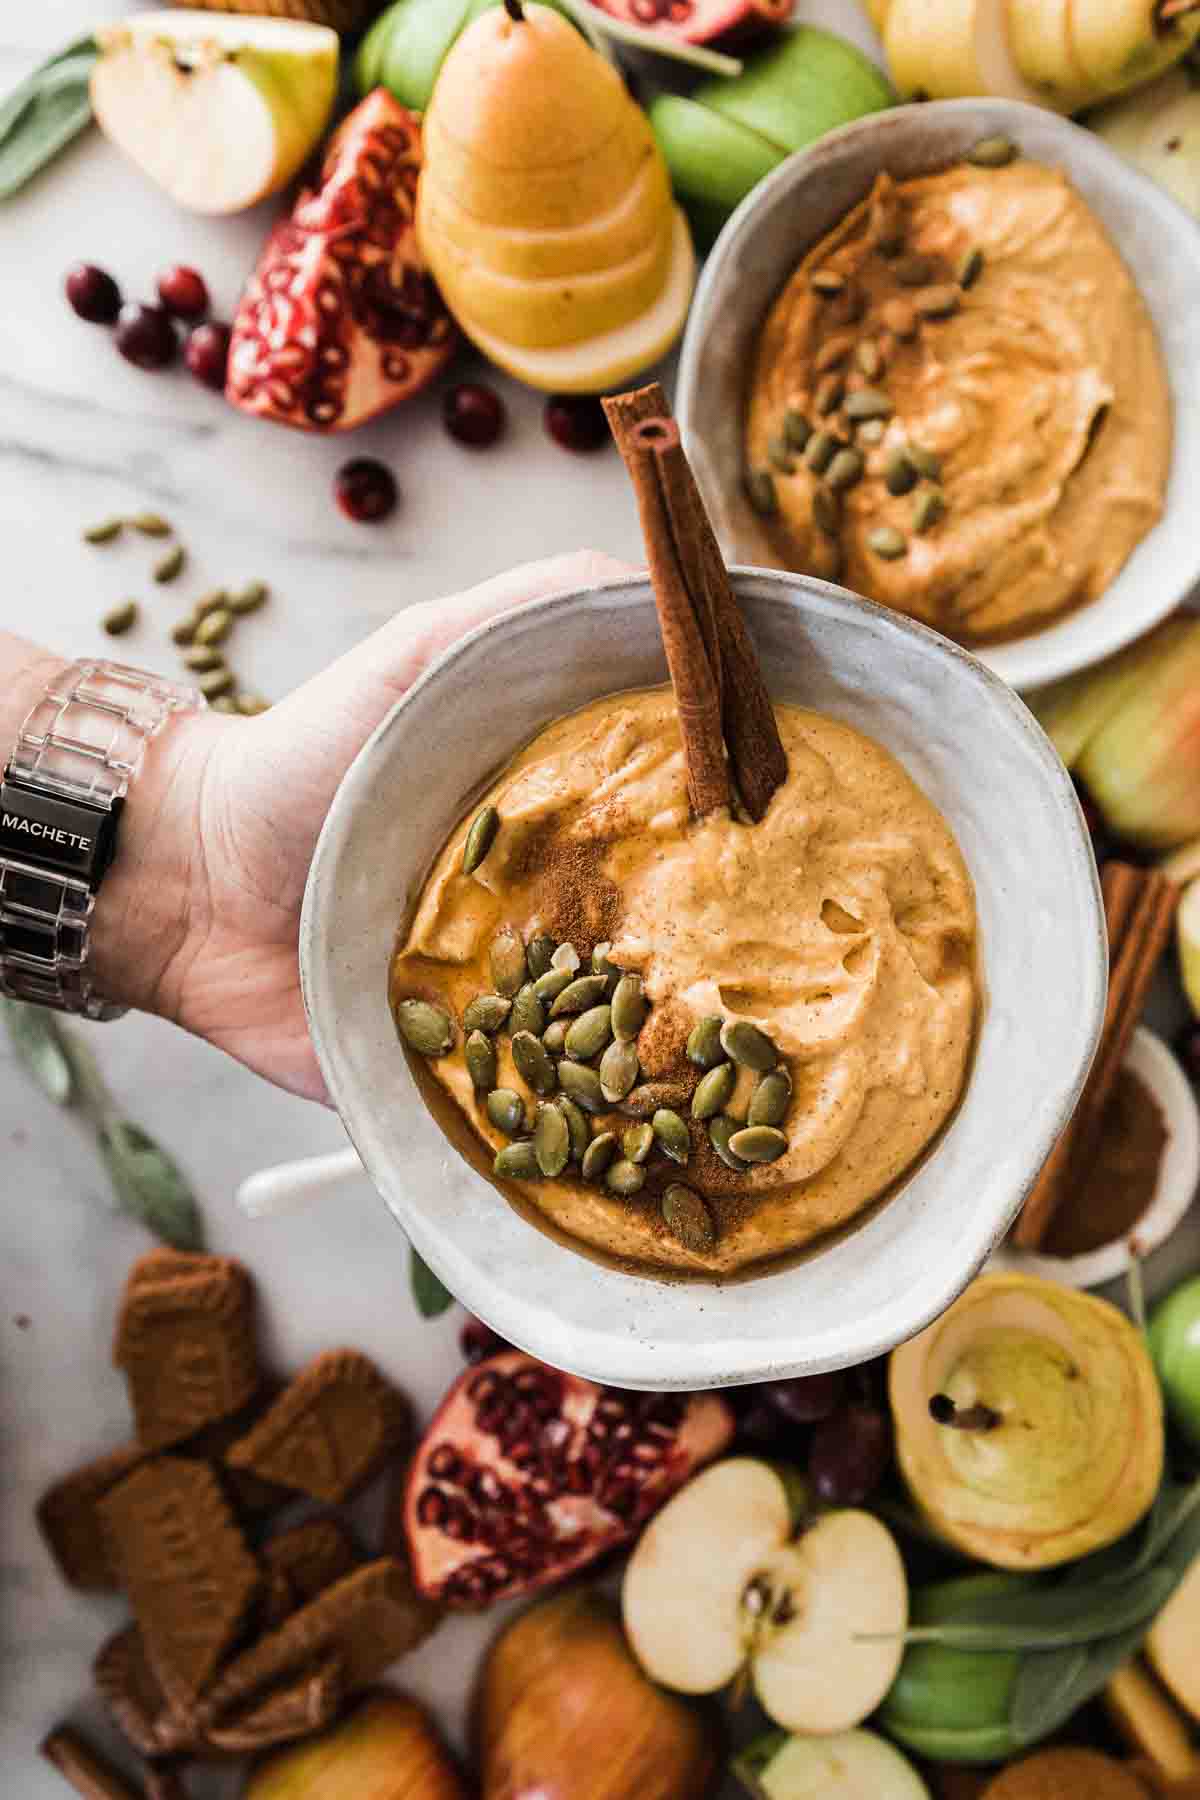 A grey bowl of pumpkin dip being held up. There is a cinnamon stick and pepitas garnishing the dip.